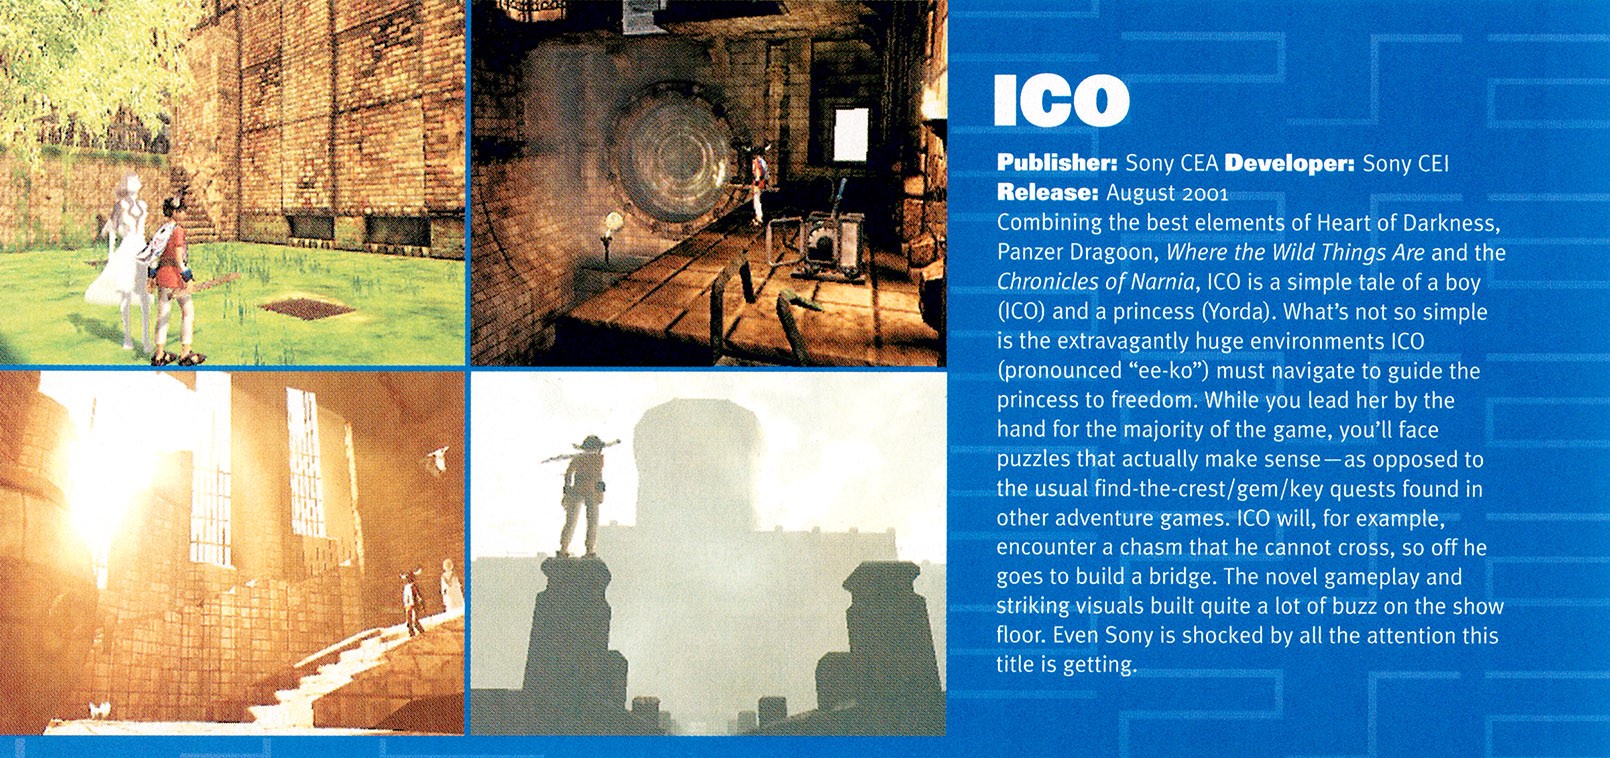 Image: A clipping from a magazine, featuring four images from e-koʊ and a review.